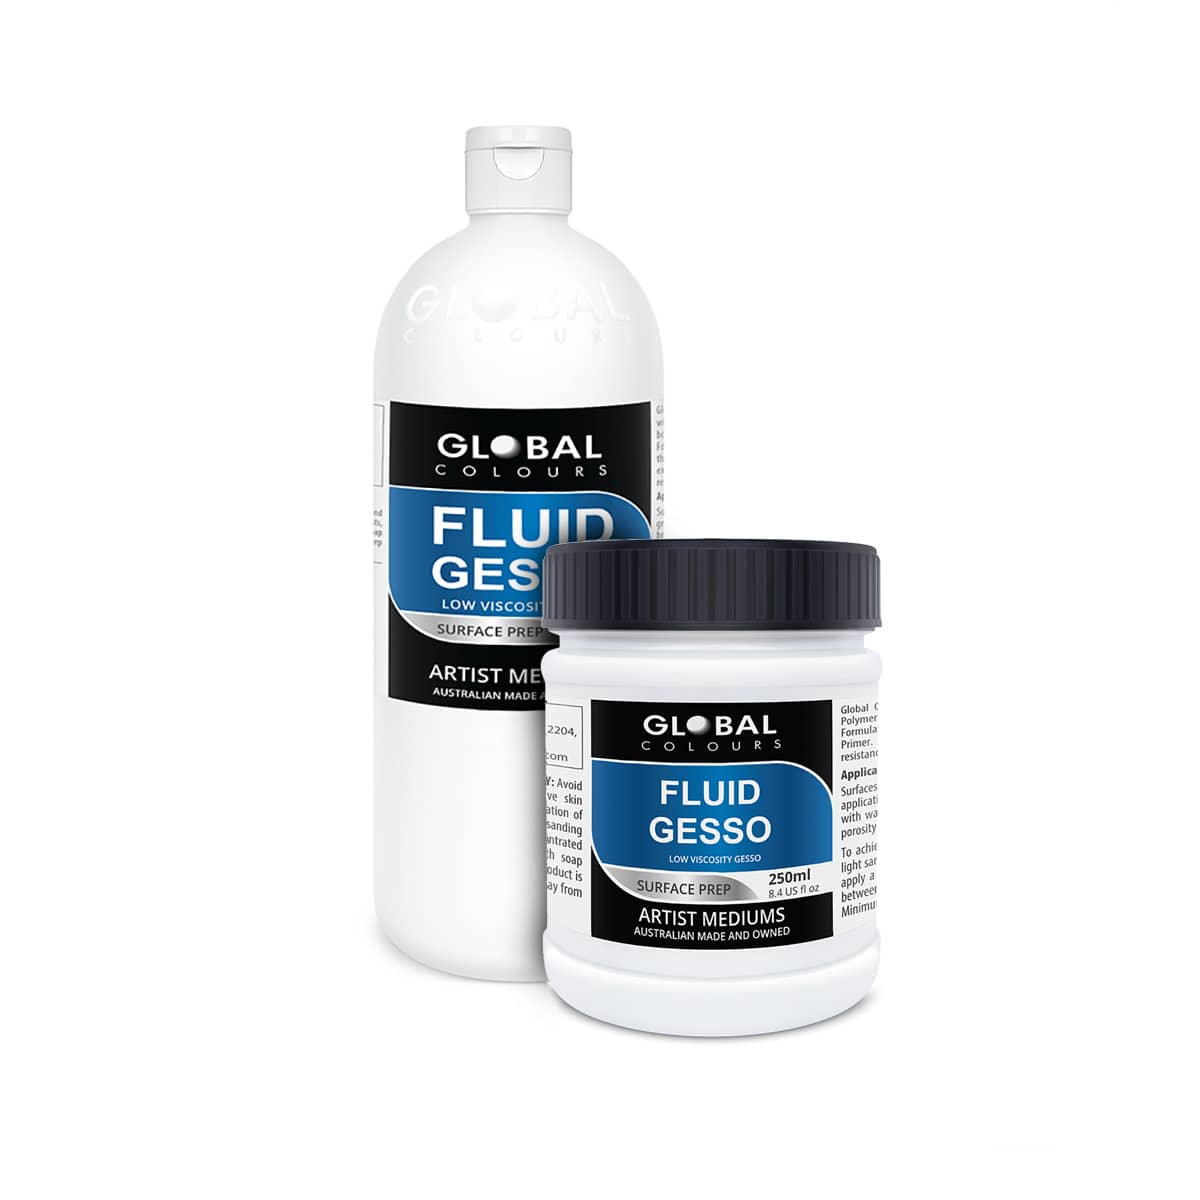 Kulay Medium Pro Clear (Transparent) Gesso 300ml - The Oil Paint Store